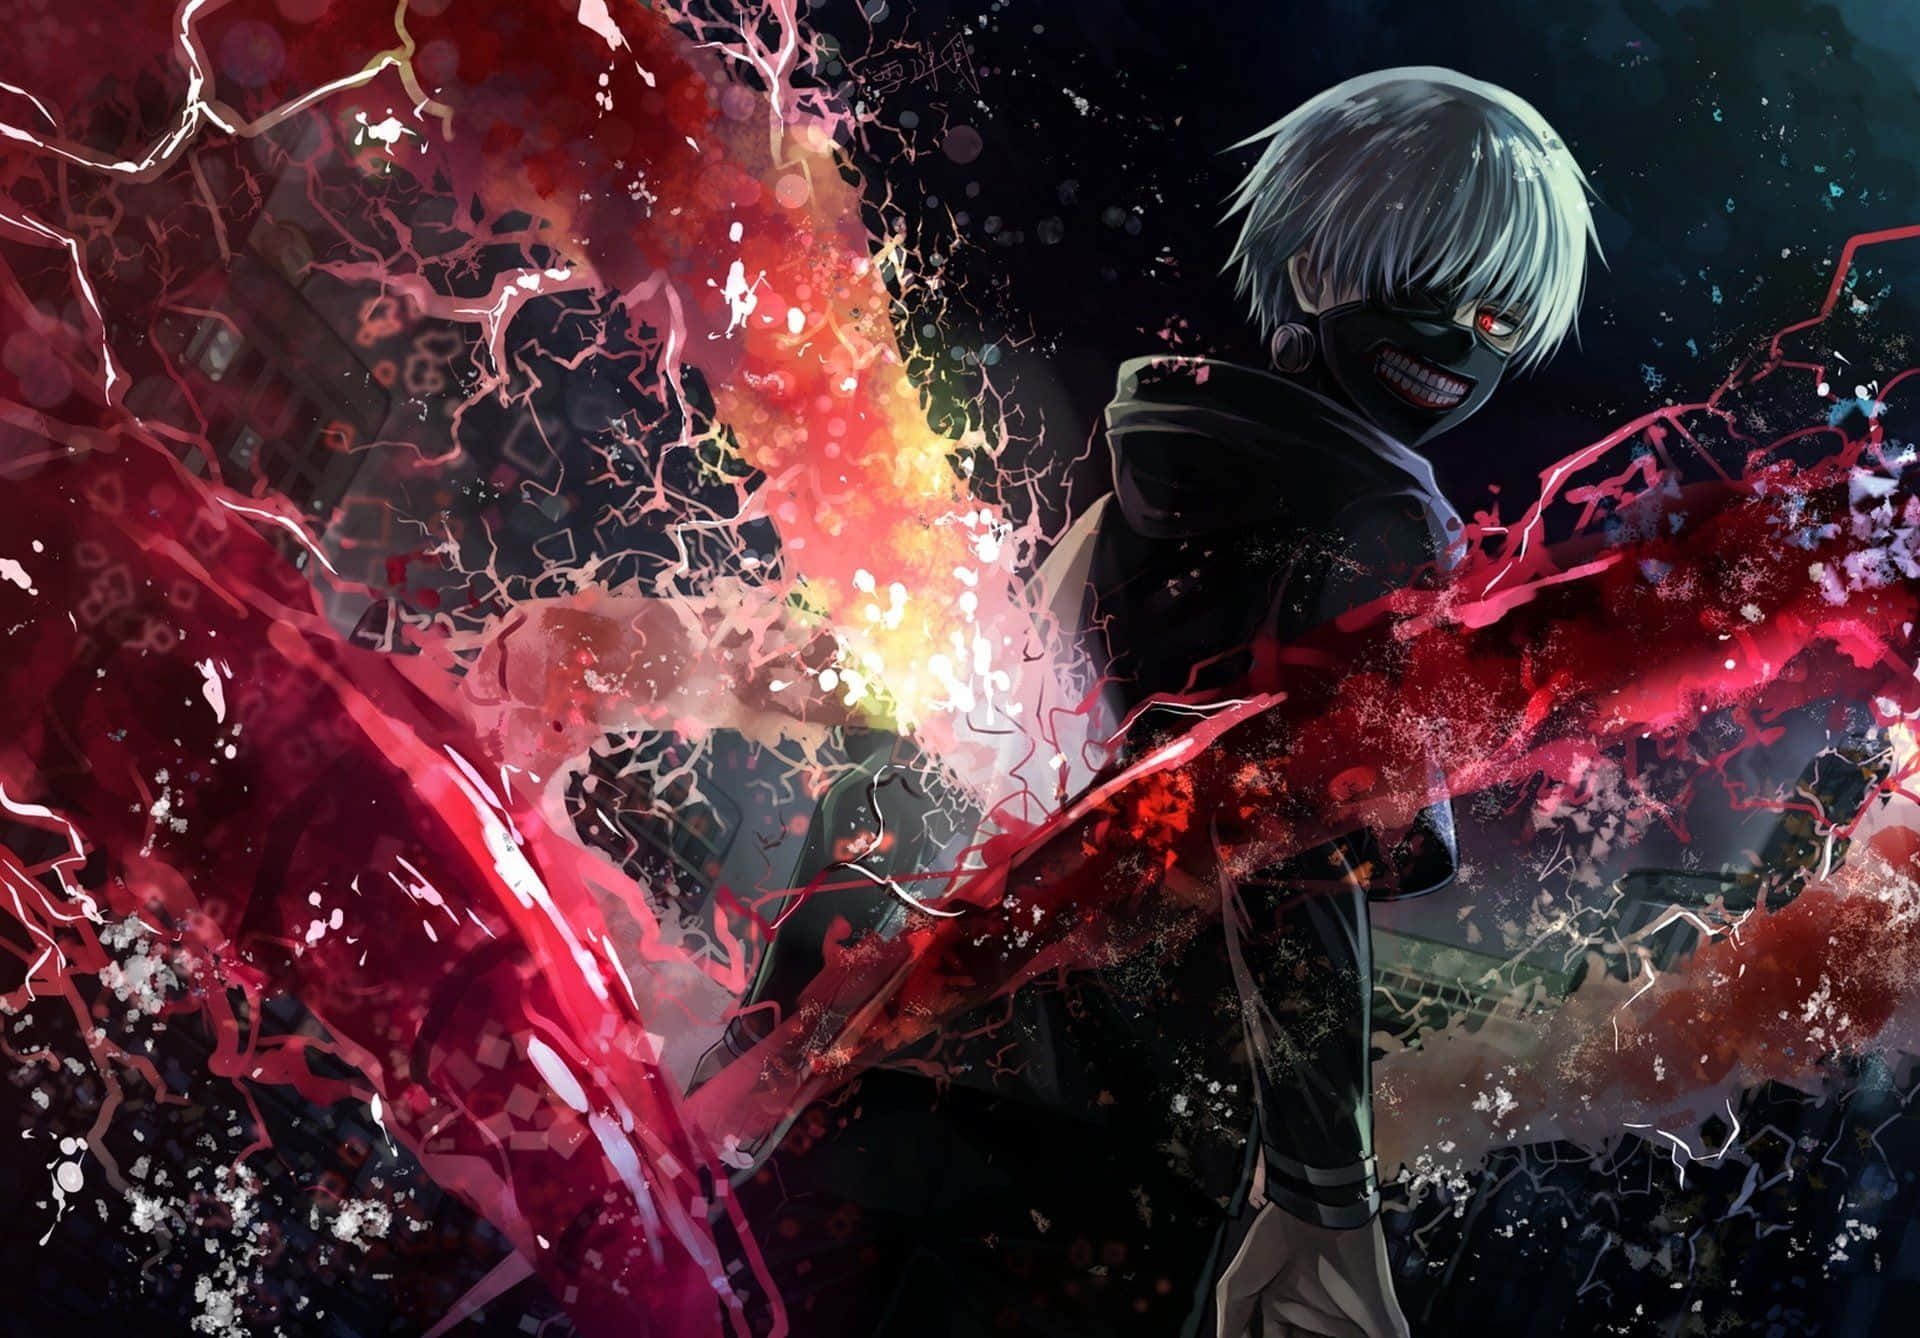 tokyo ghoul anime phone wallpaper / background  Tokyo ghoul, Tokyo ghoul  wallpapers, Tokyo ghoul anime